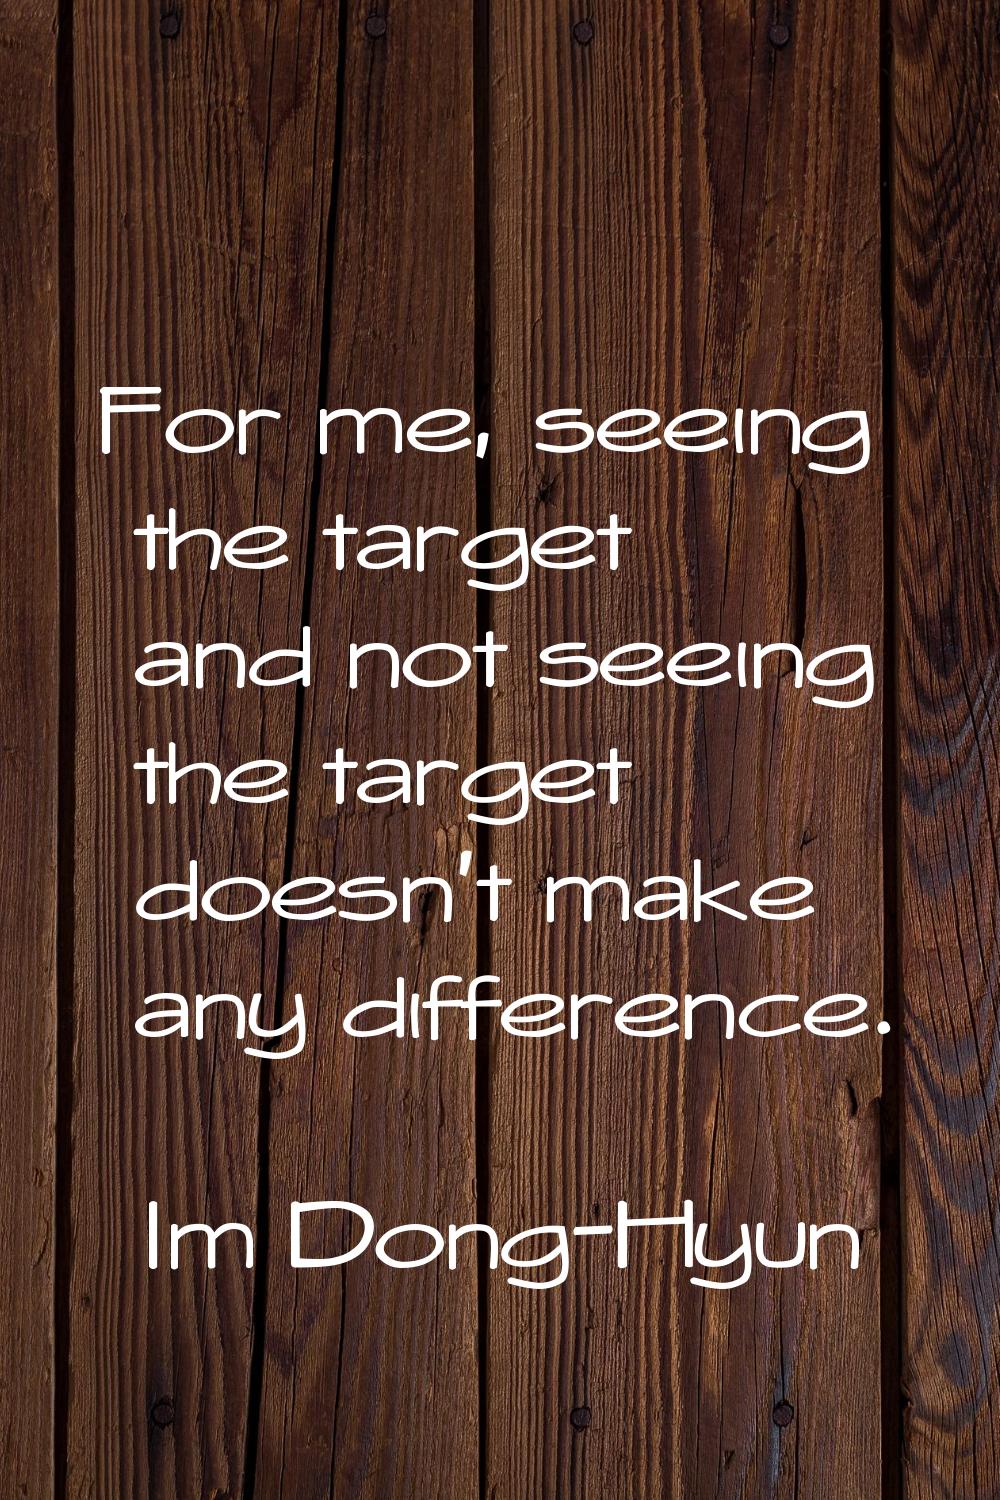 For me, seeing the target and not seeing the target doesn't make any difference.